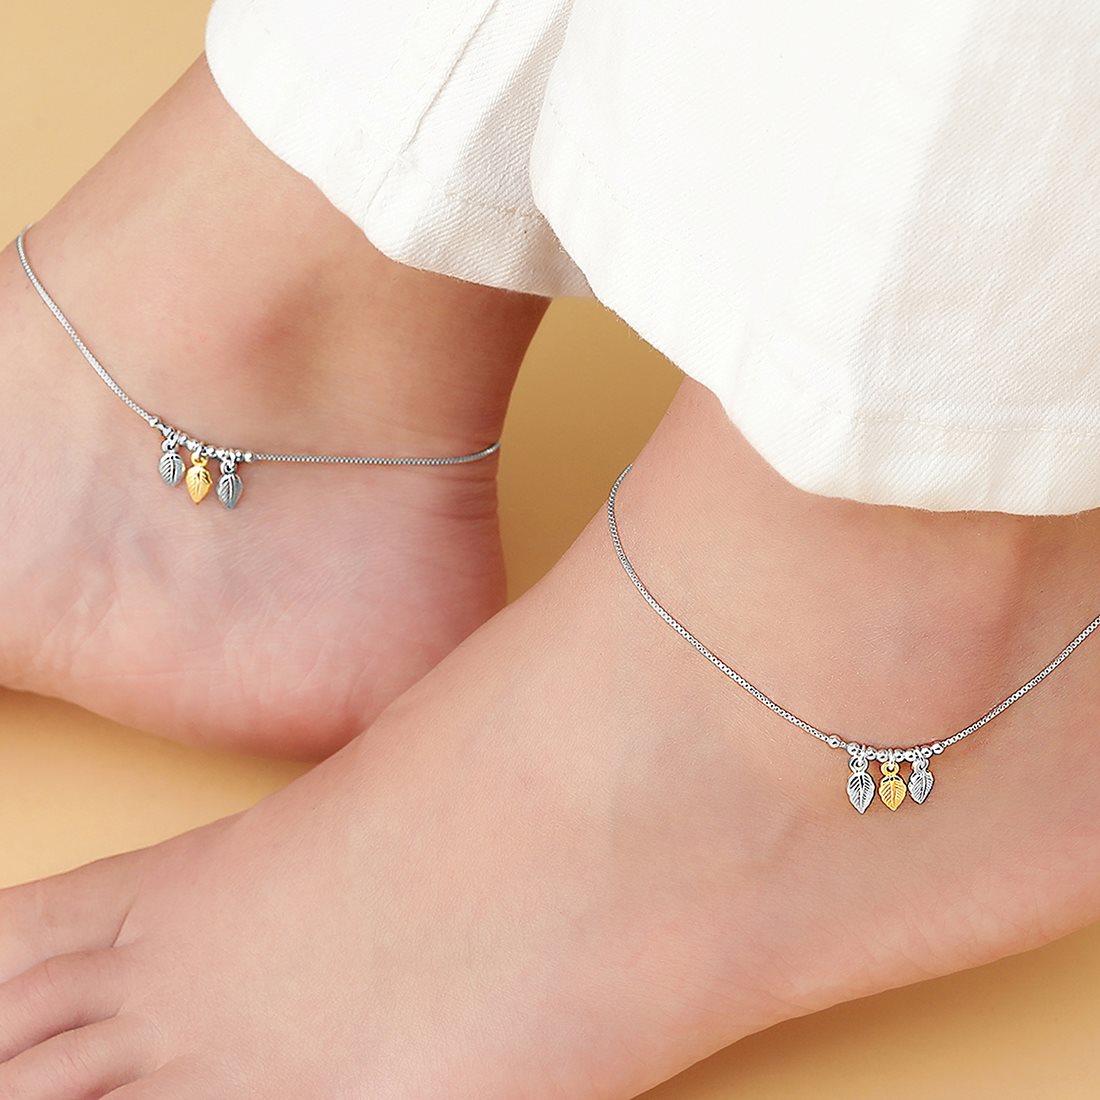 Leafy Delight Rhodium Plated 925 Sterling Silver Anklet with Leaf Pattern